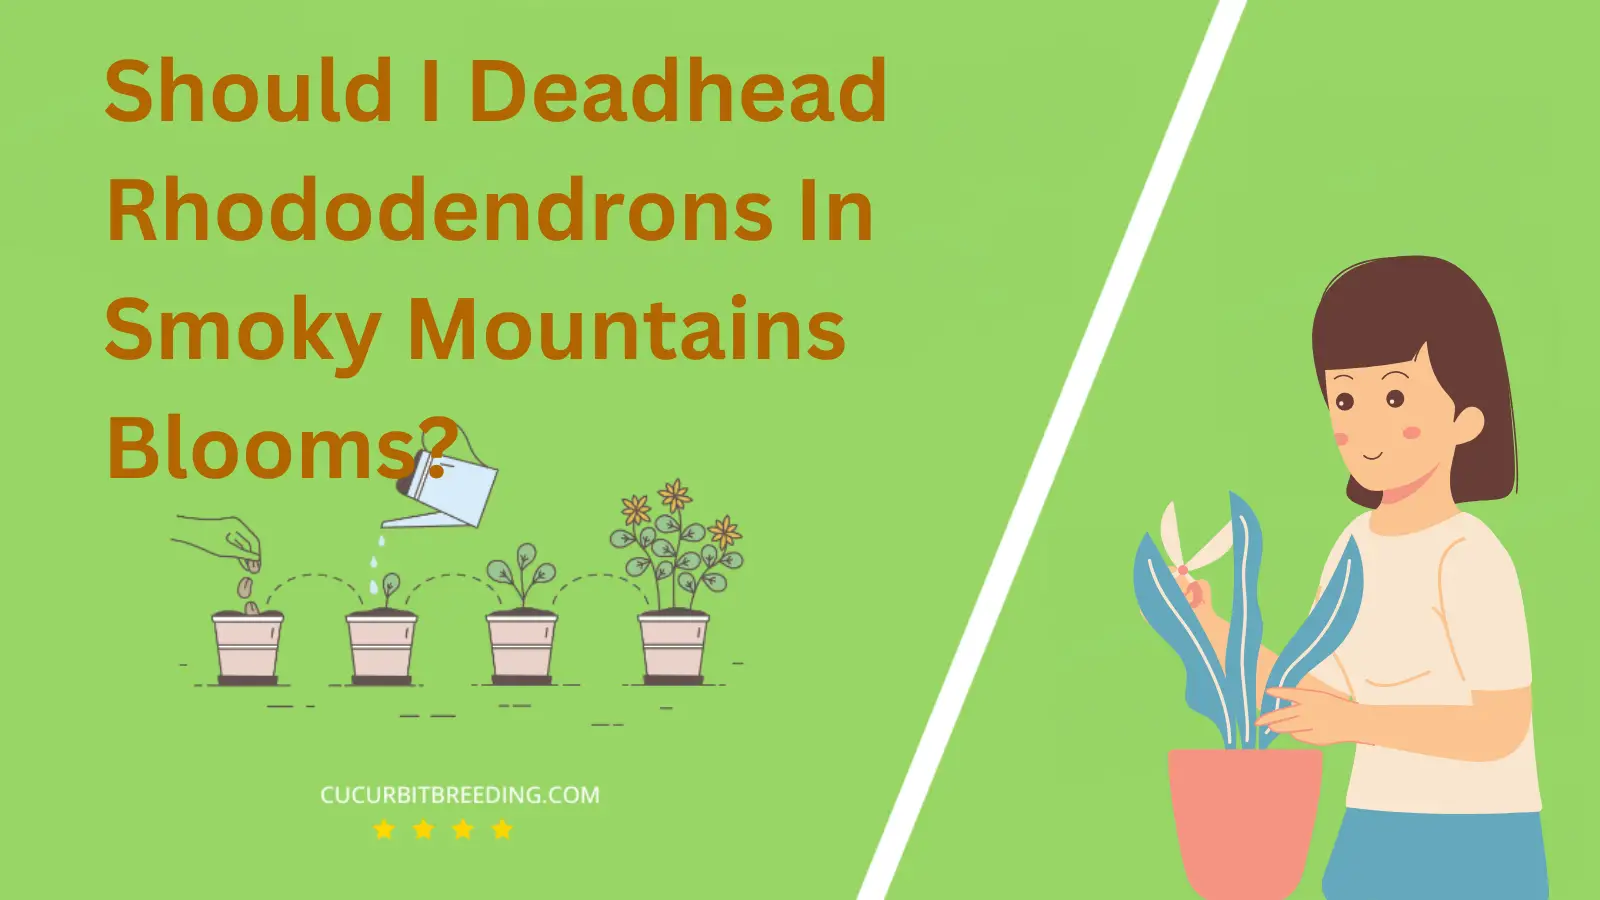 Should I Deadhead Rhododendrons In Smoky Mountains Blooms?